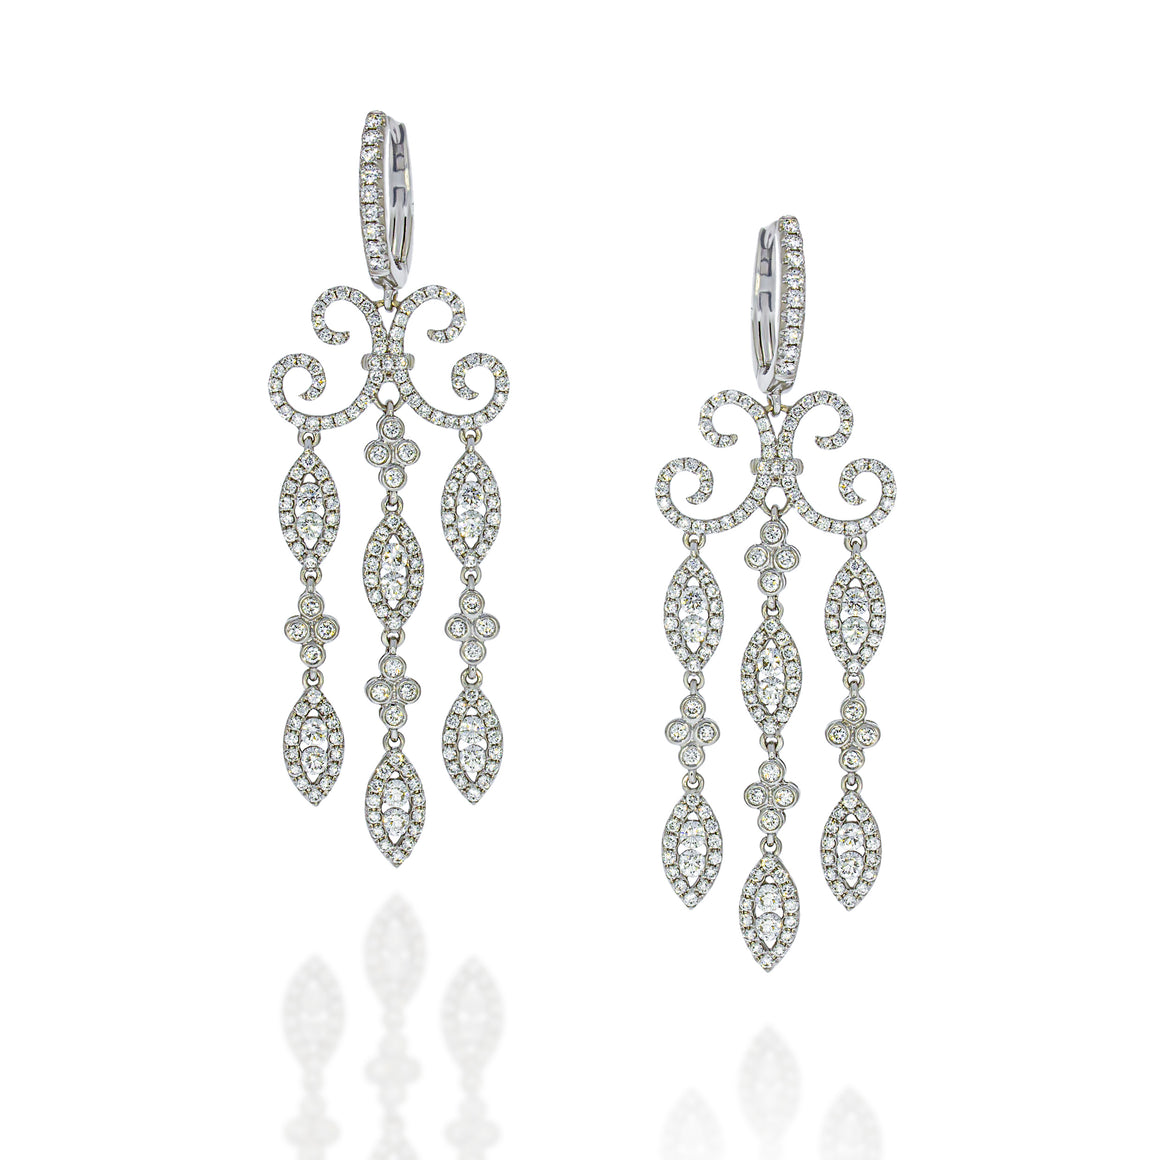 Drop earrings diamonds pave filigree swirl design. 18k white gold set with stylish pave diamonds for shaining and glamore look.